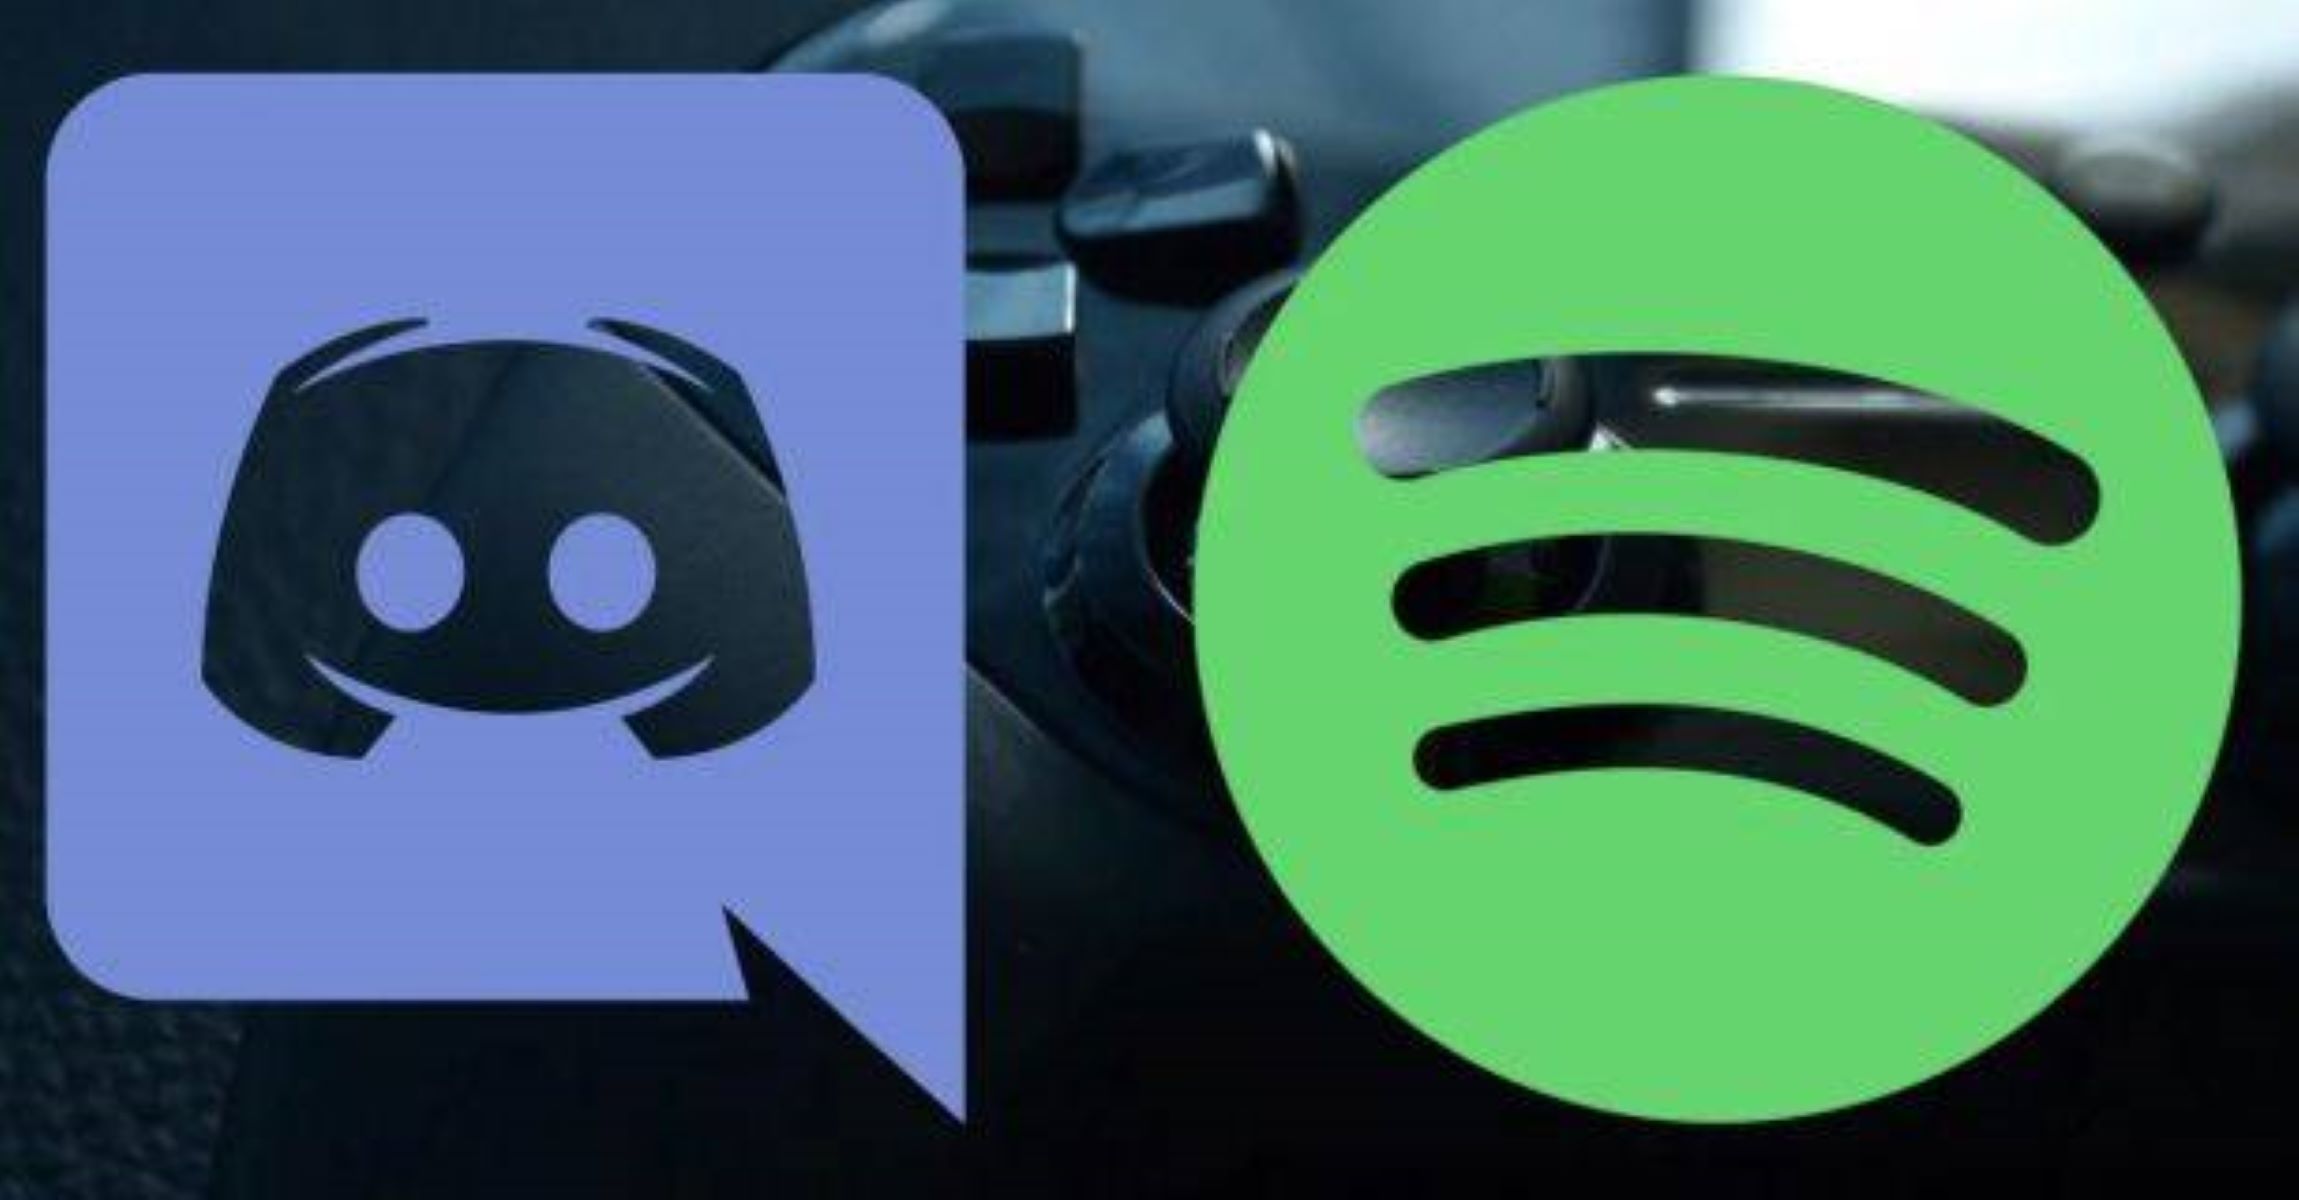 How To Start A Listening Party On Spotify Discord